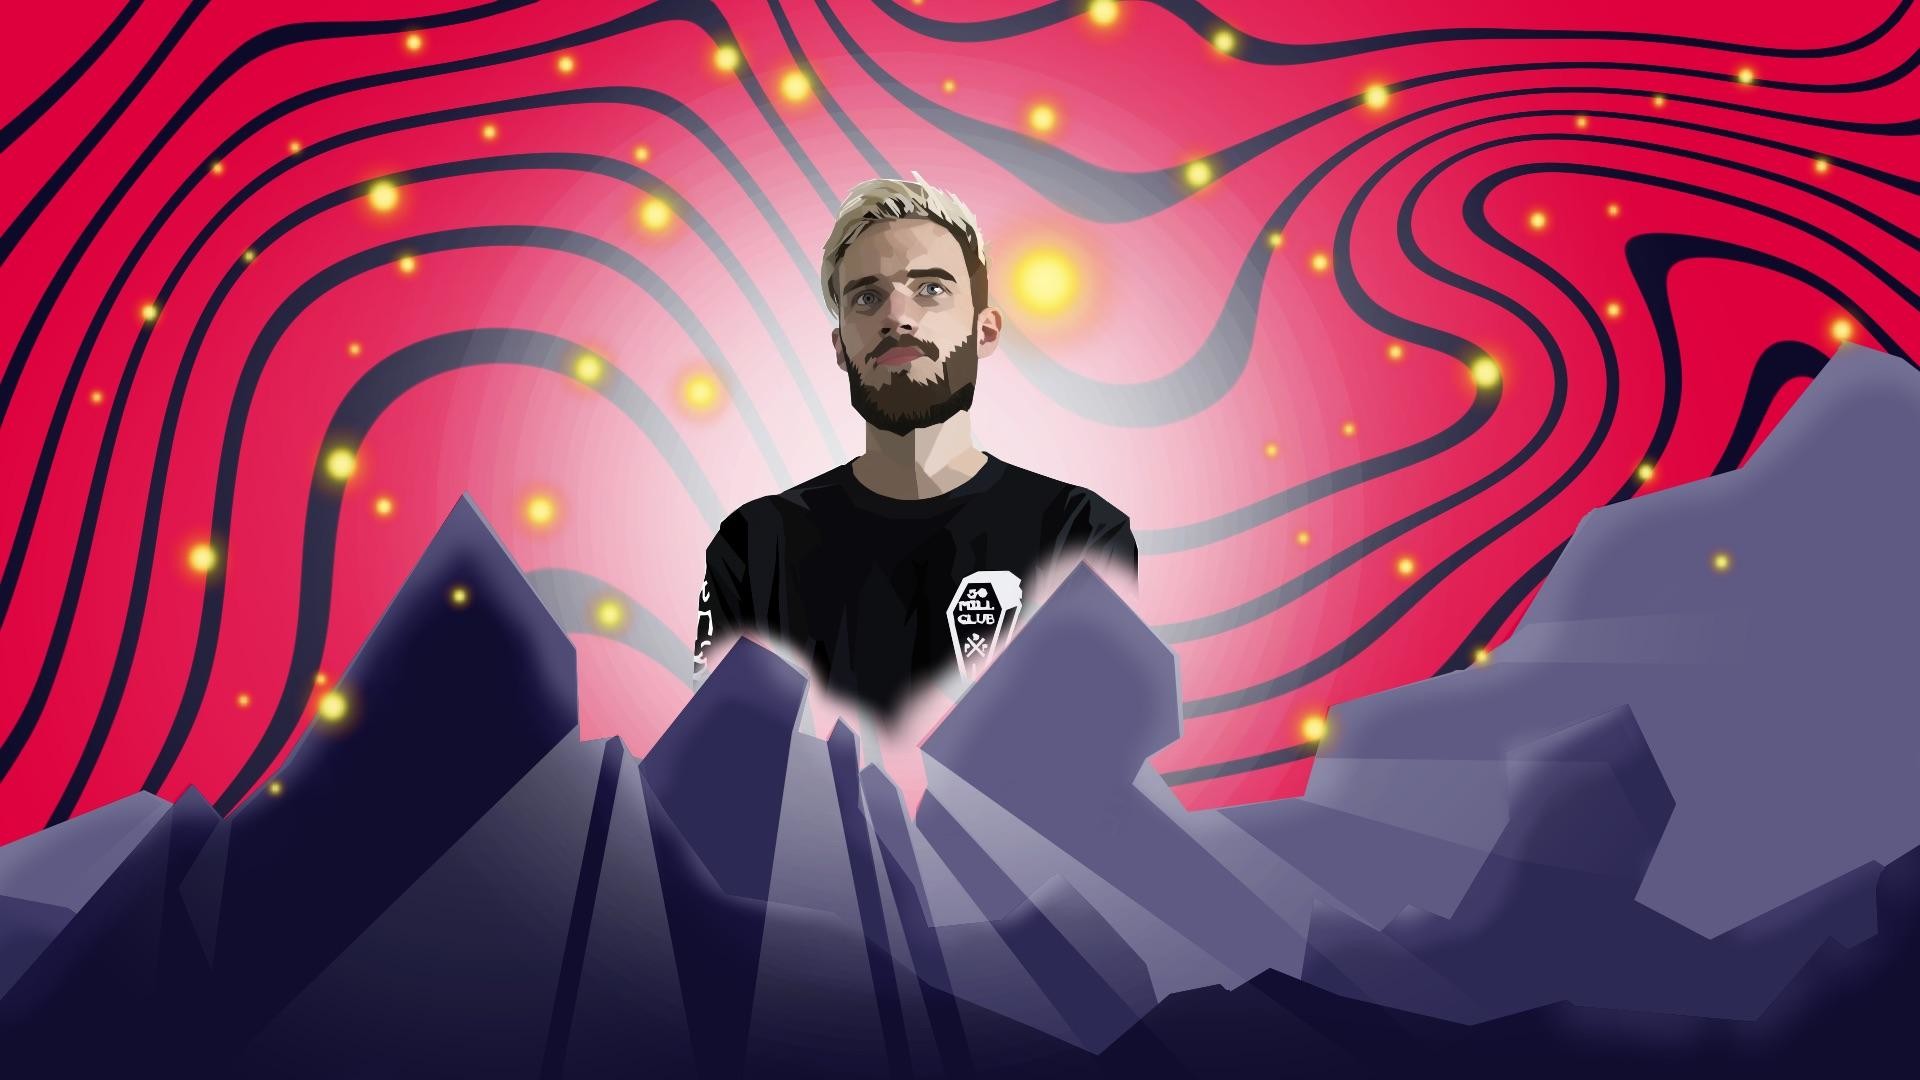 1920x1080 Wallpaper for pewdiepie :3 It took me over 6 hours to edit his body ð° but  was worth it.